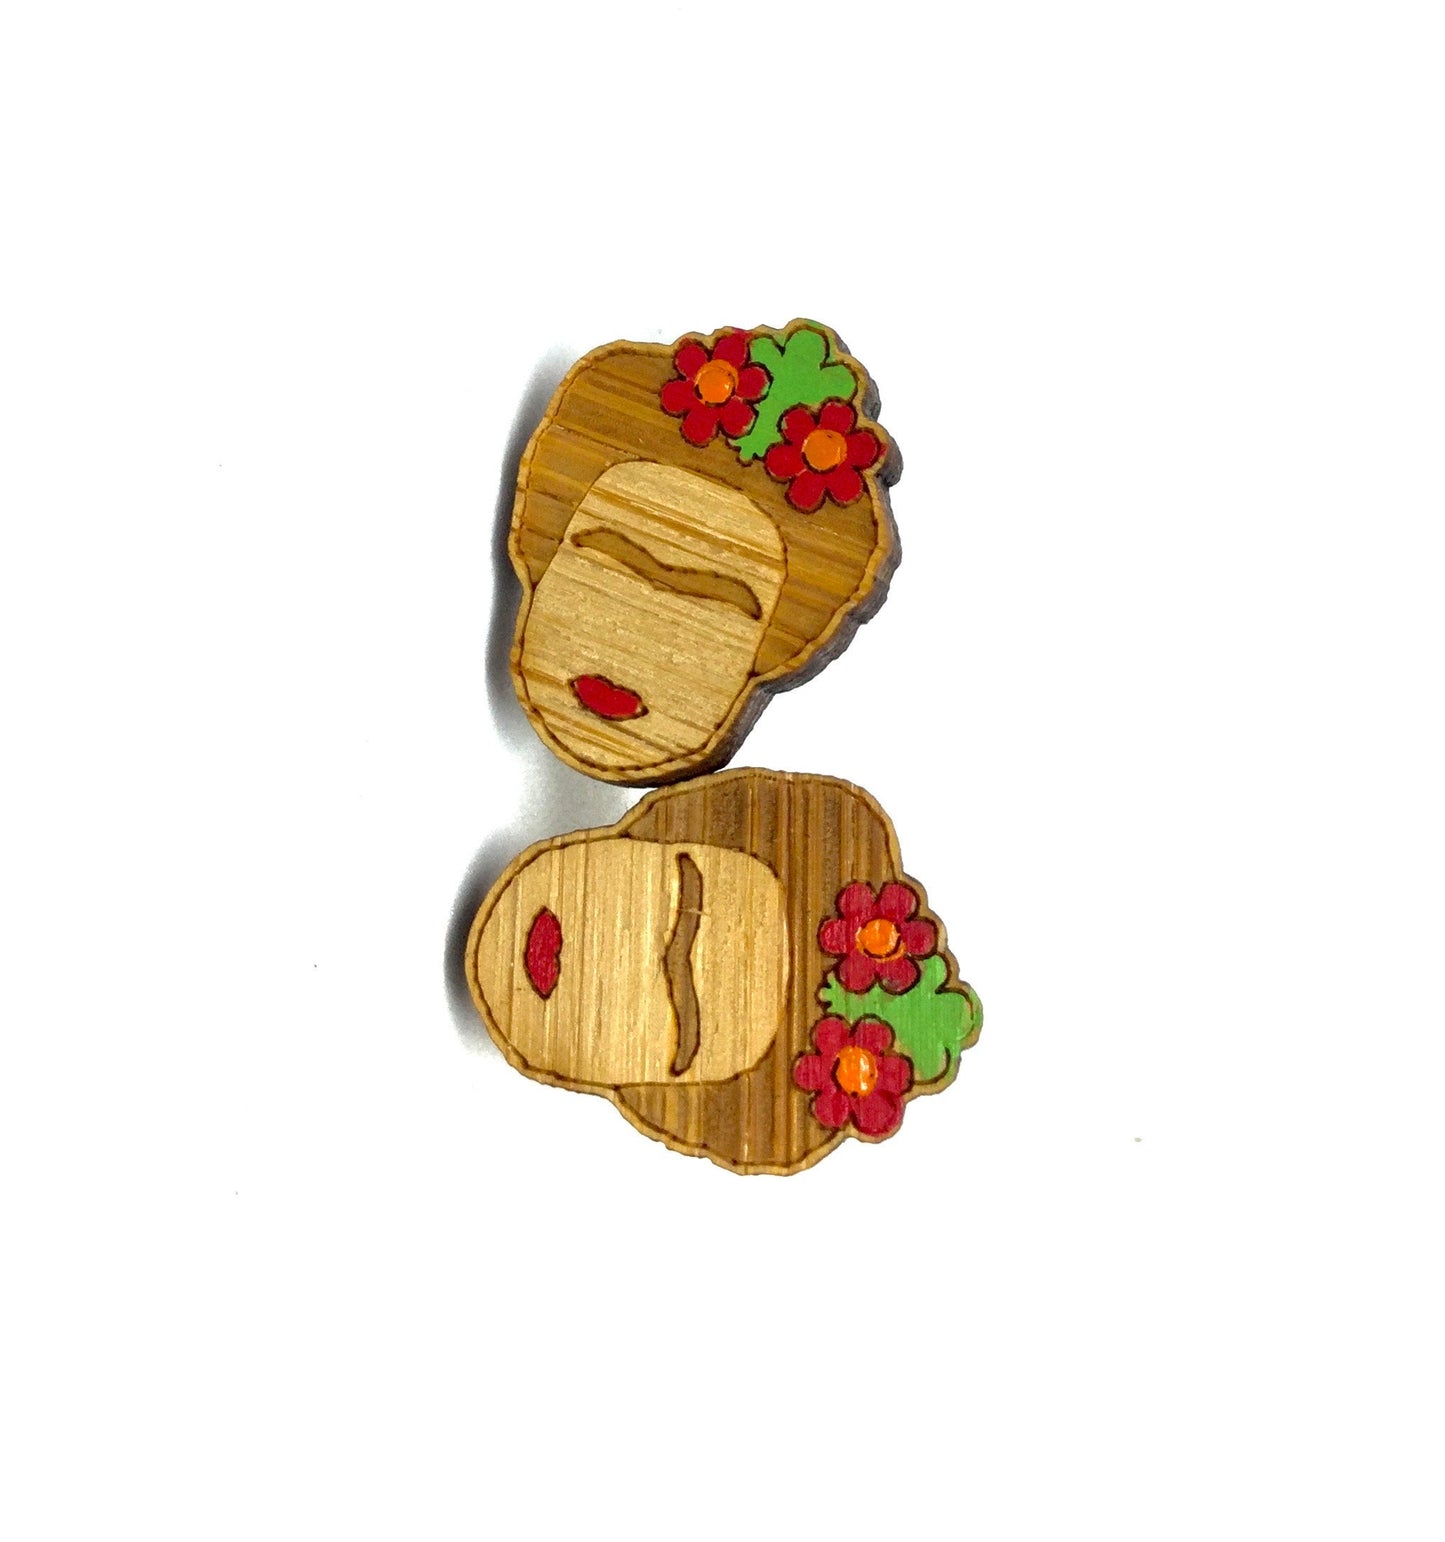 Cute Frida Earrings Stud Bamboo Wood HandPainted Red Flowers Floral Jewelry Girl Summer Fashion Casual Outfit Perfect Gift Idea Fridalovers